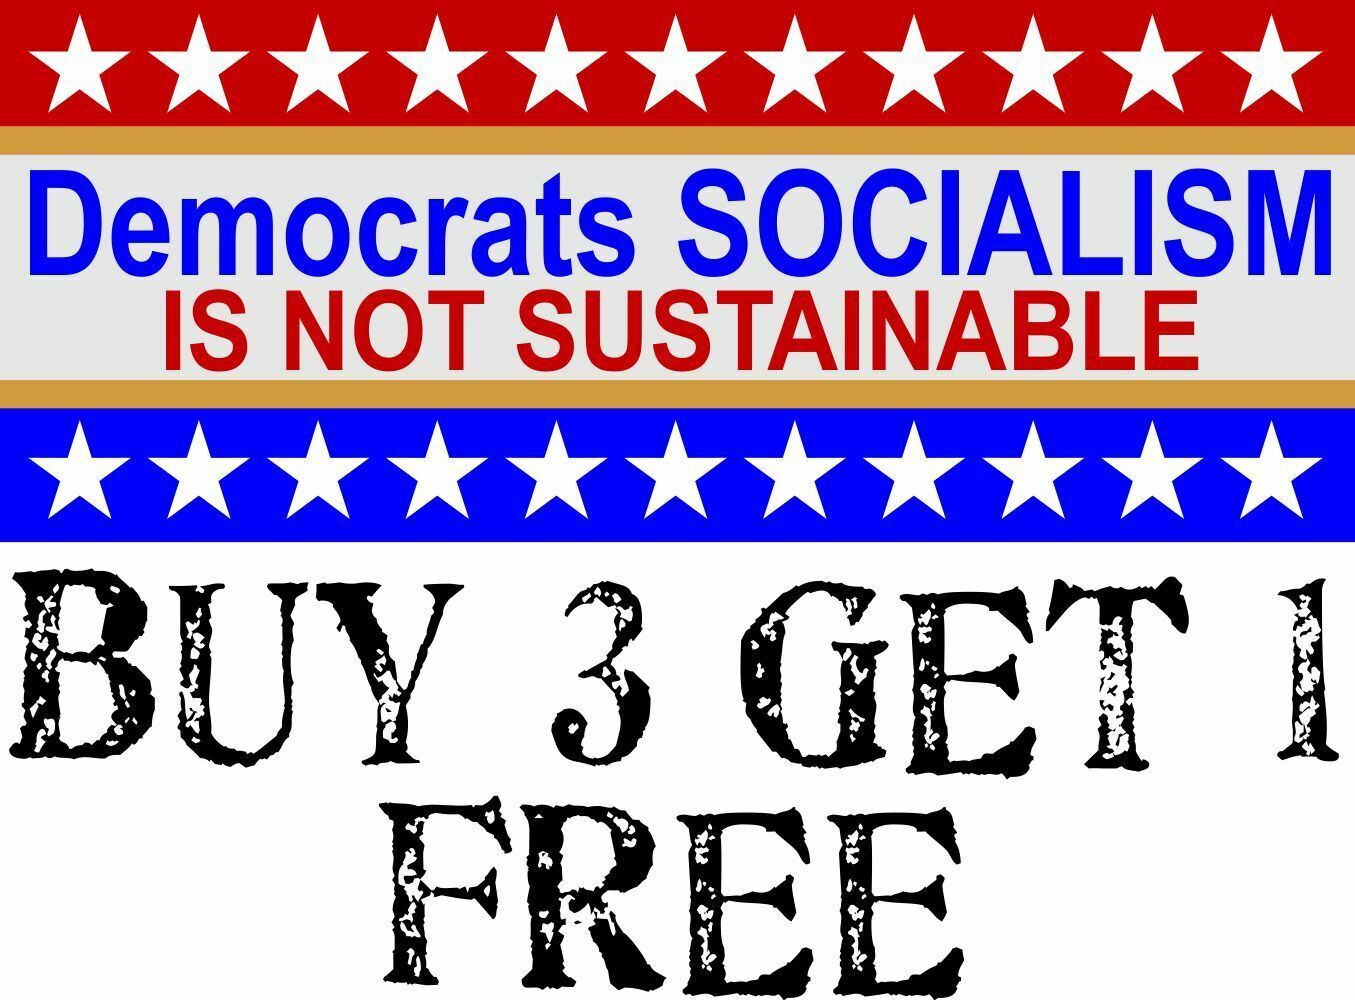 Democrats Socialism not Sustainable Bumper Sticker 10" x 4" Outdoor Decal - Powercall Sirens LLC